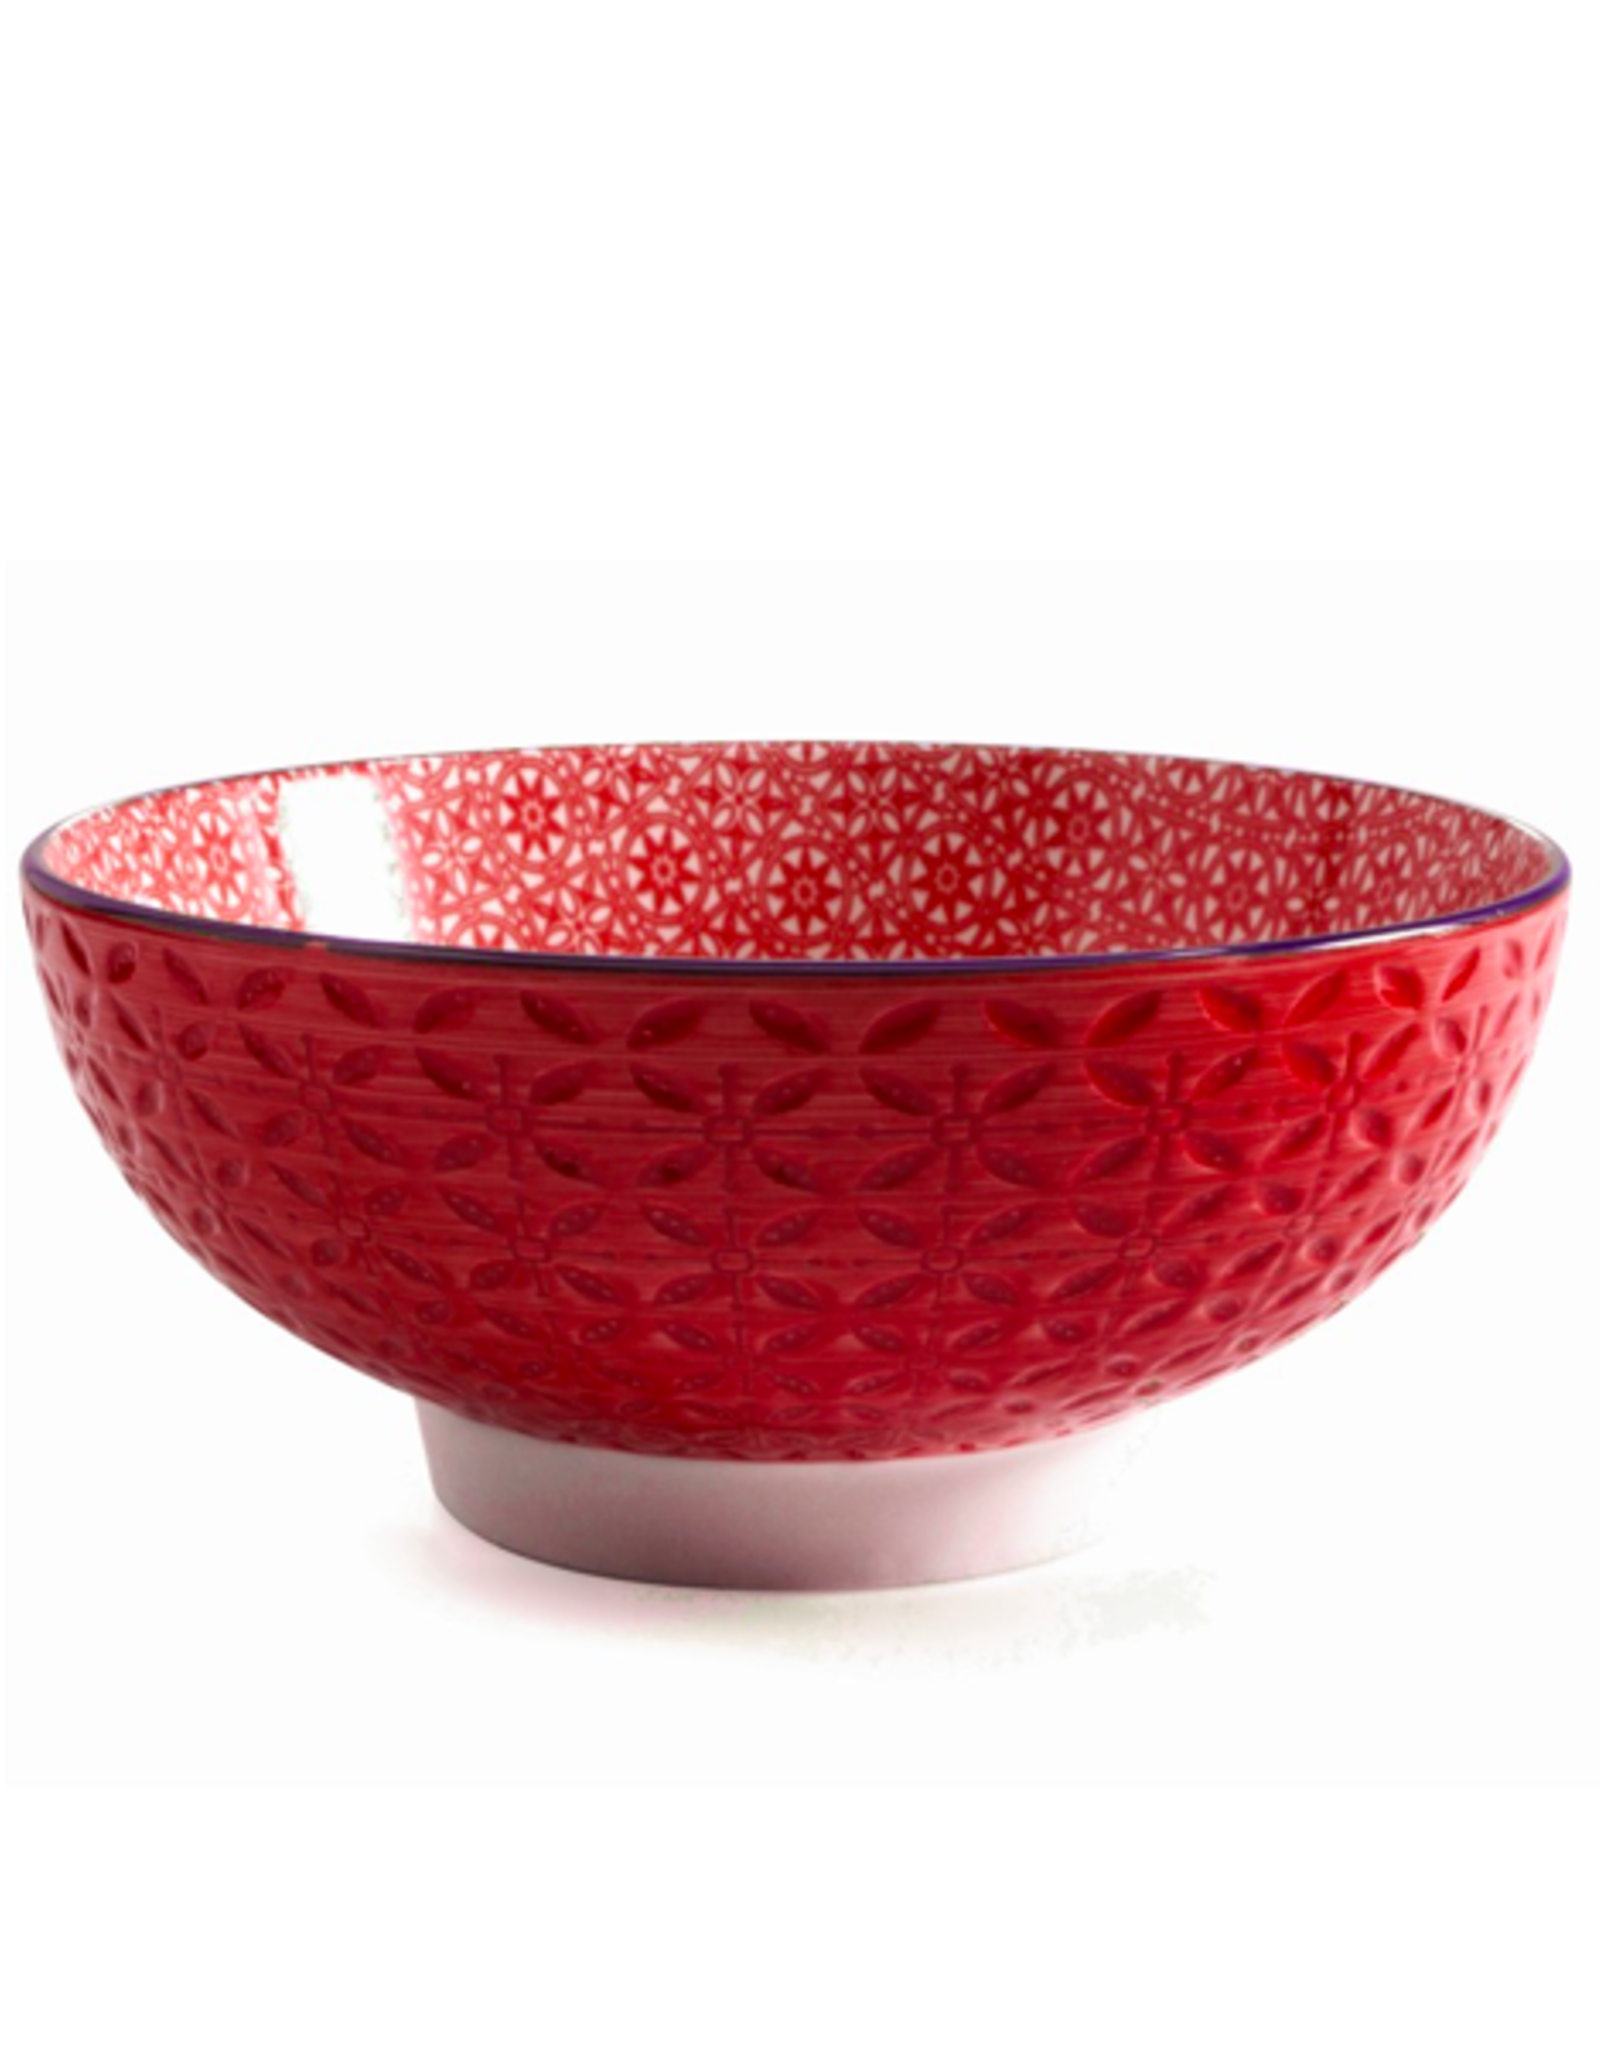 DCO - Footed Bowl / Chain, Red, 7"